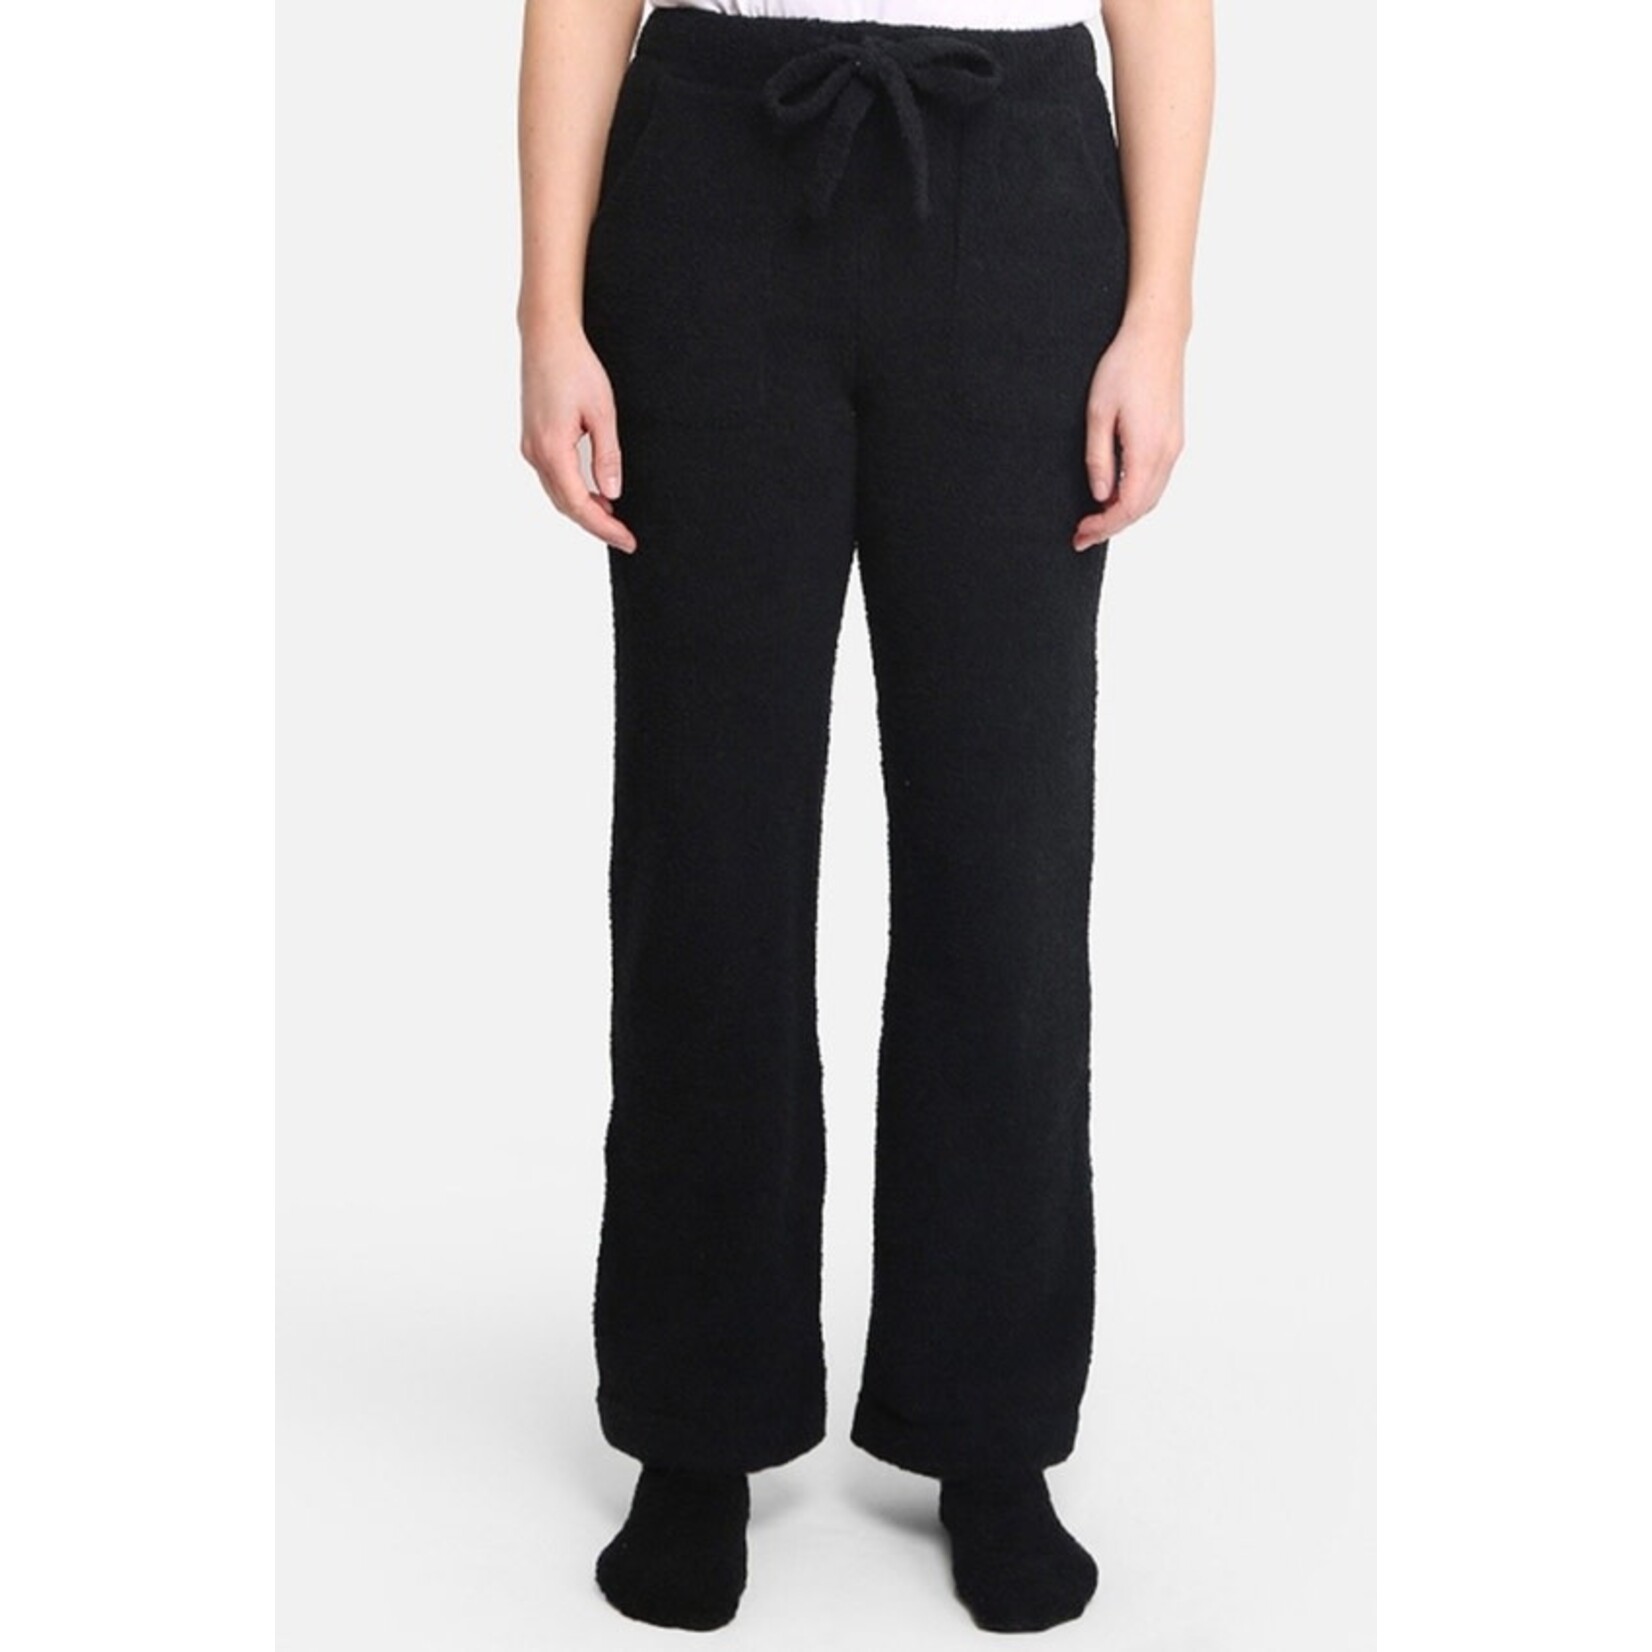 Solid Color Luxury Soft Lounge Pants